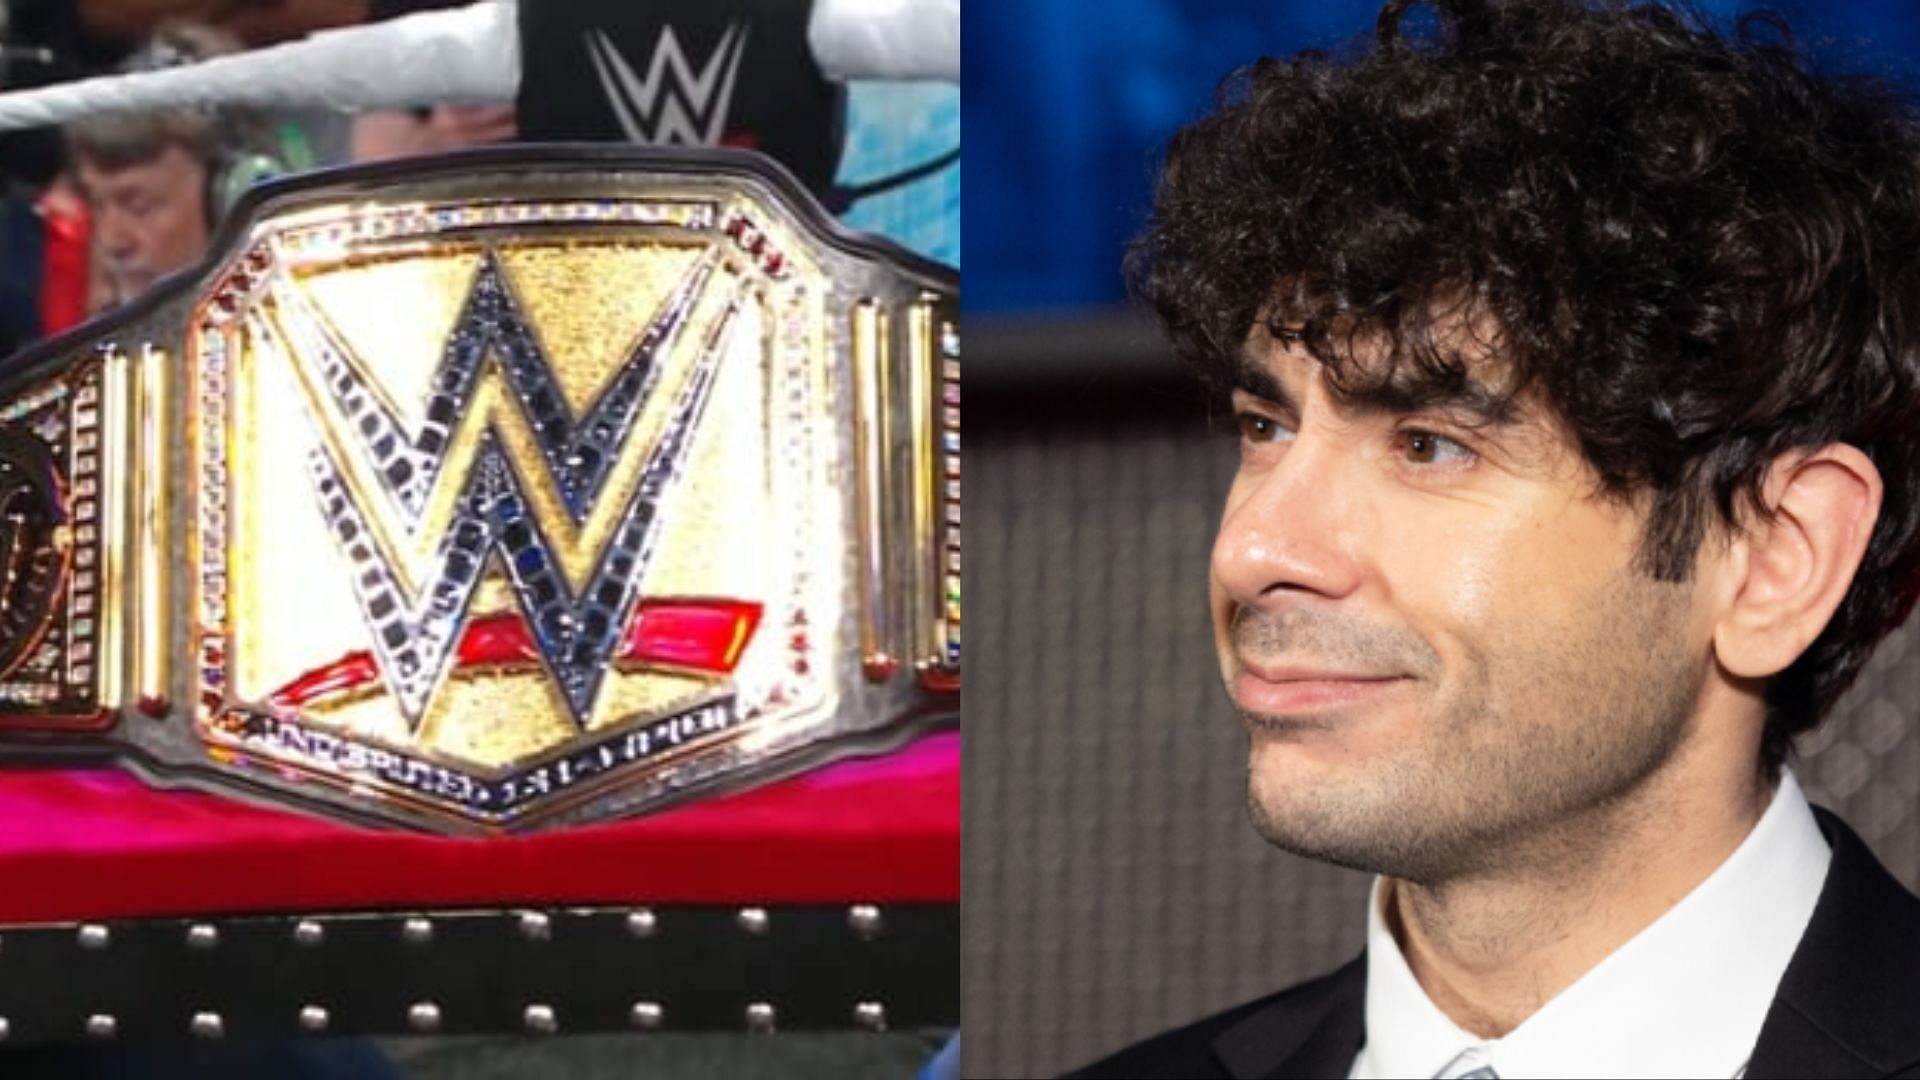 Tony Khan recently signed a former WWE Champion to AEW